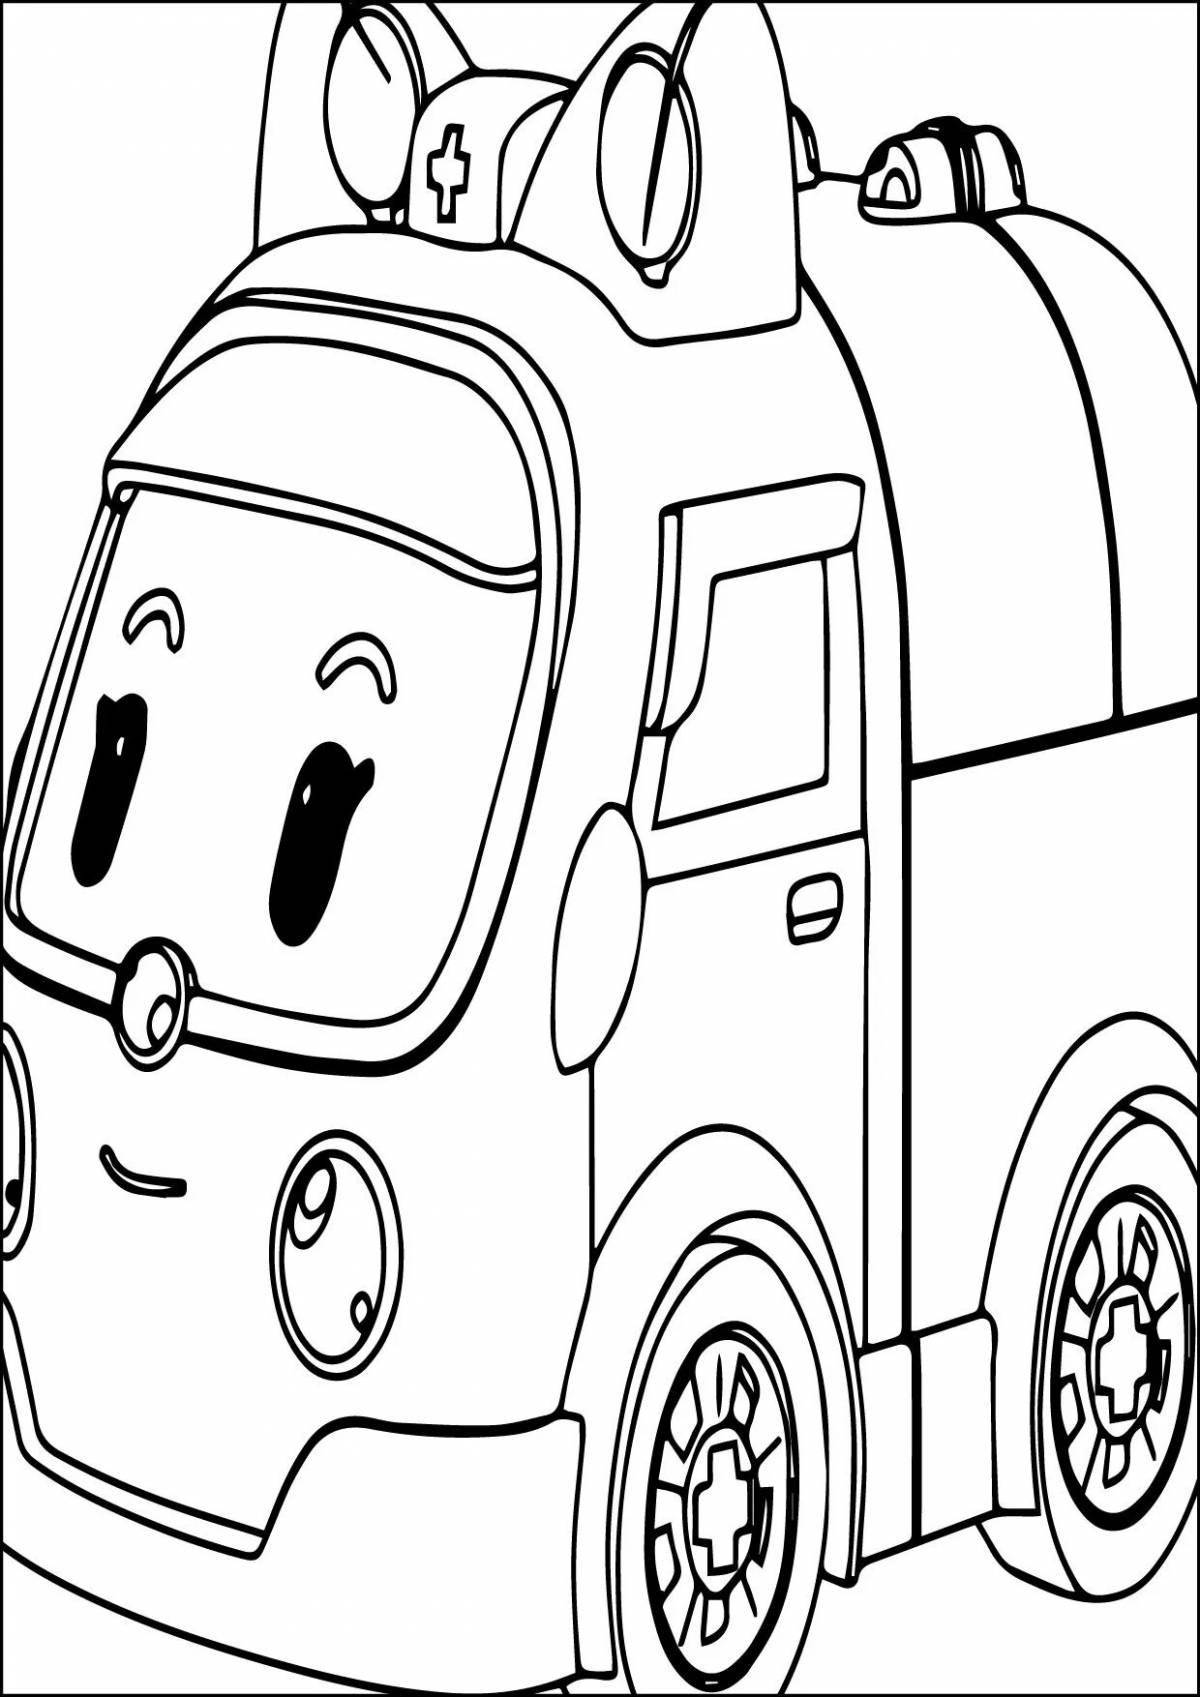 Attractive fire truck poly robocar coloring page